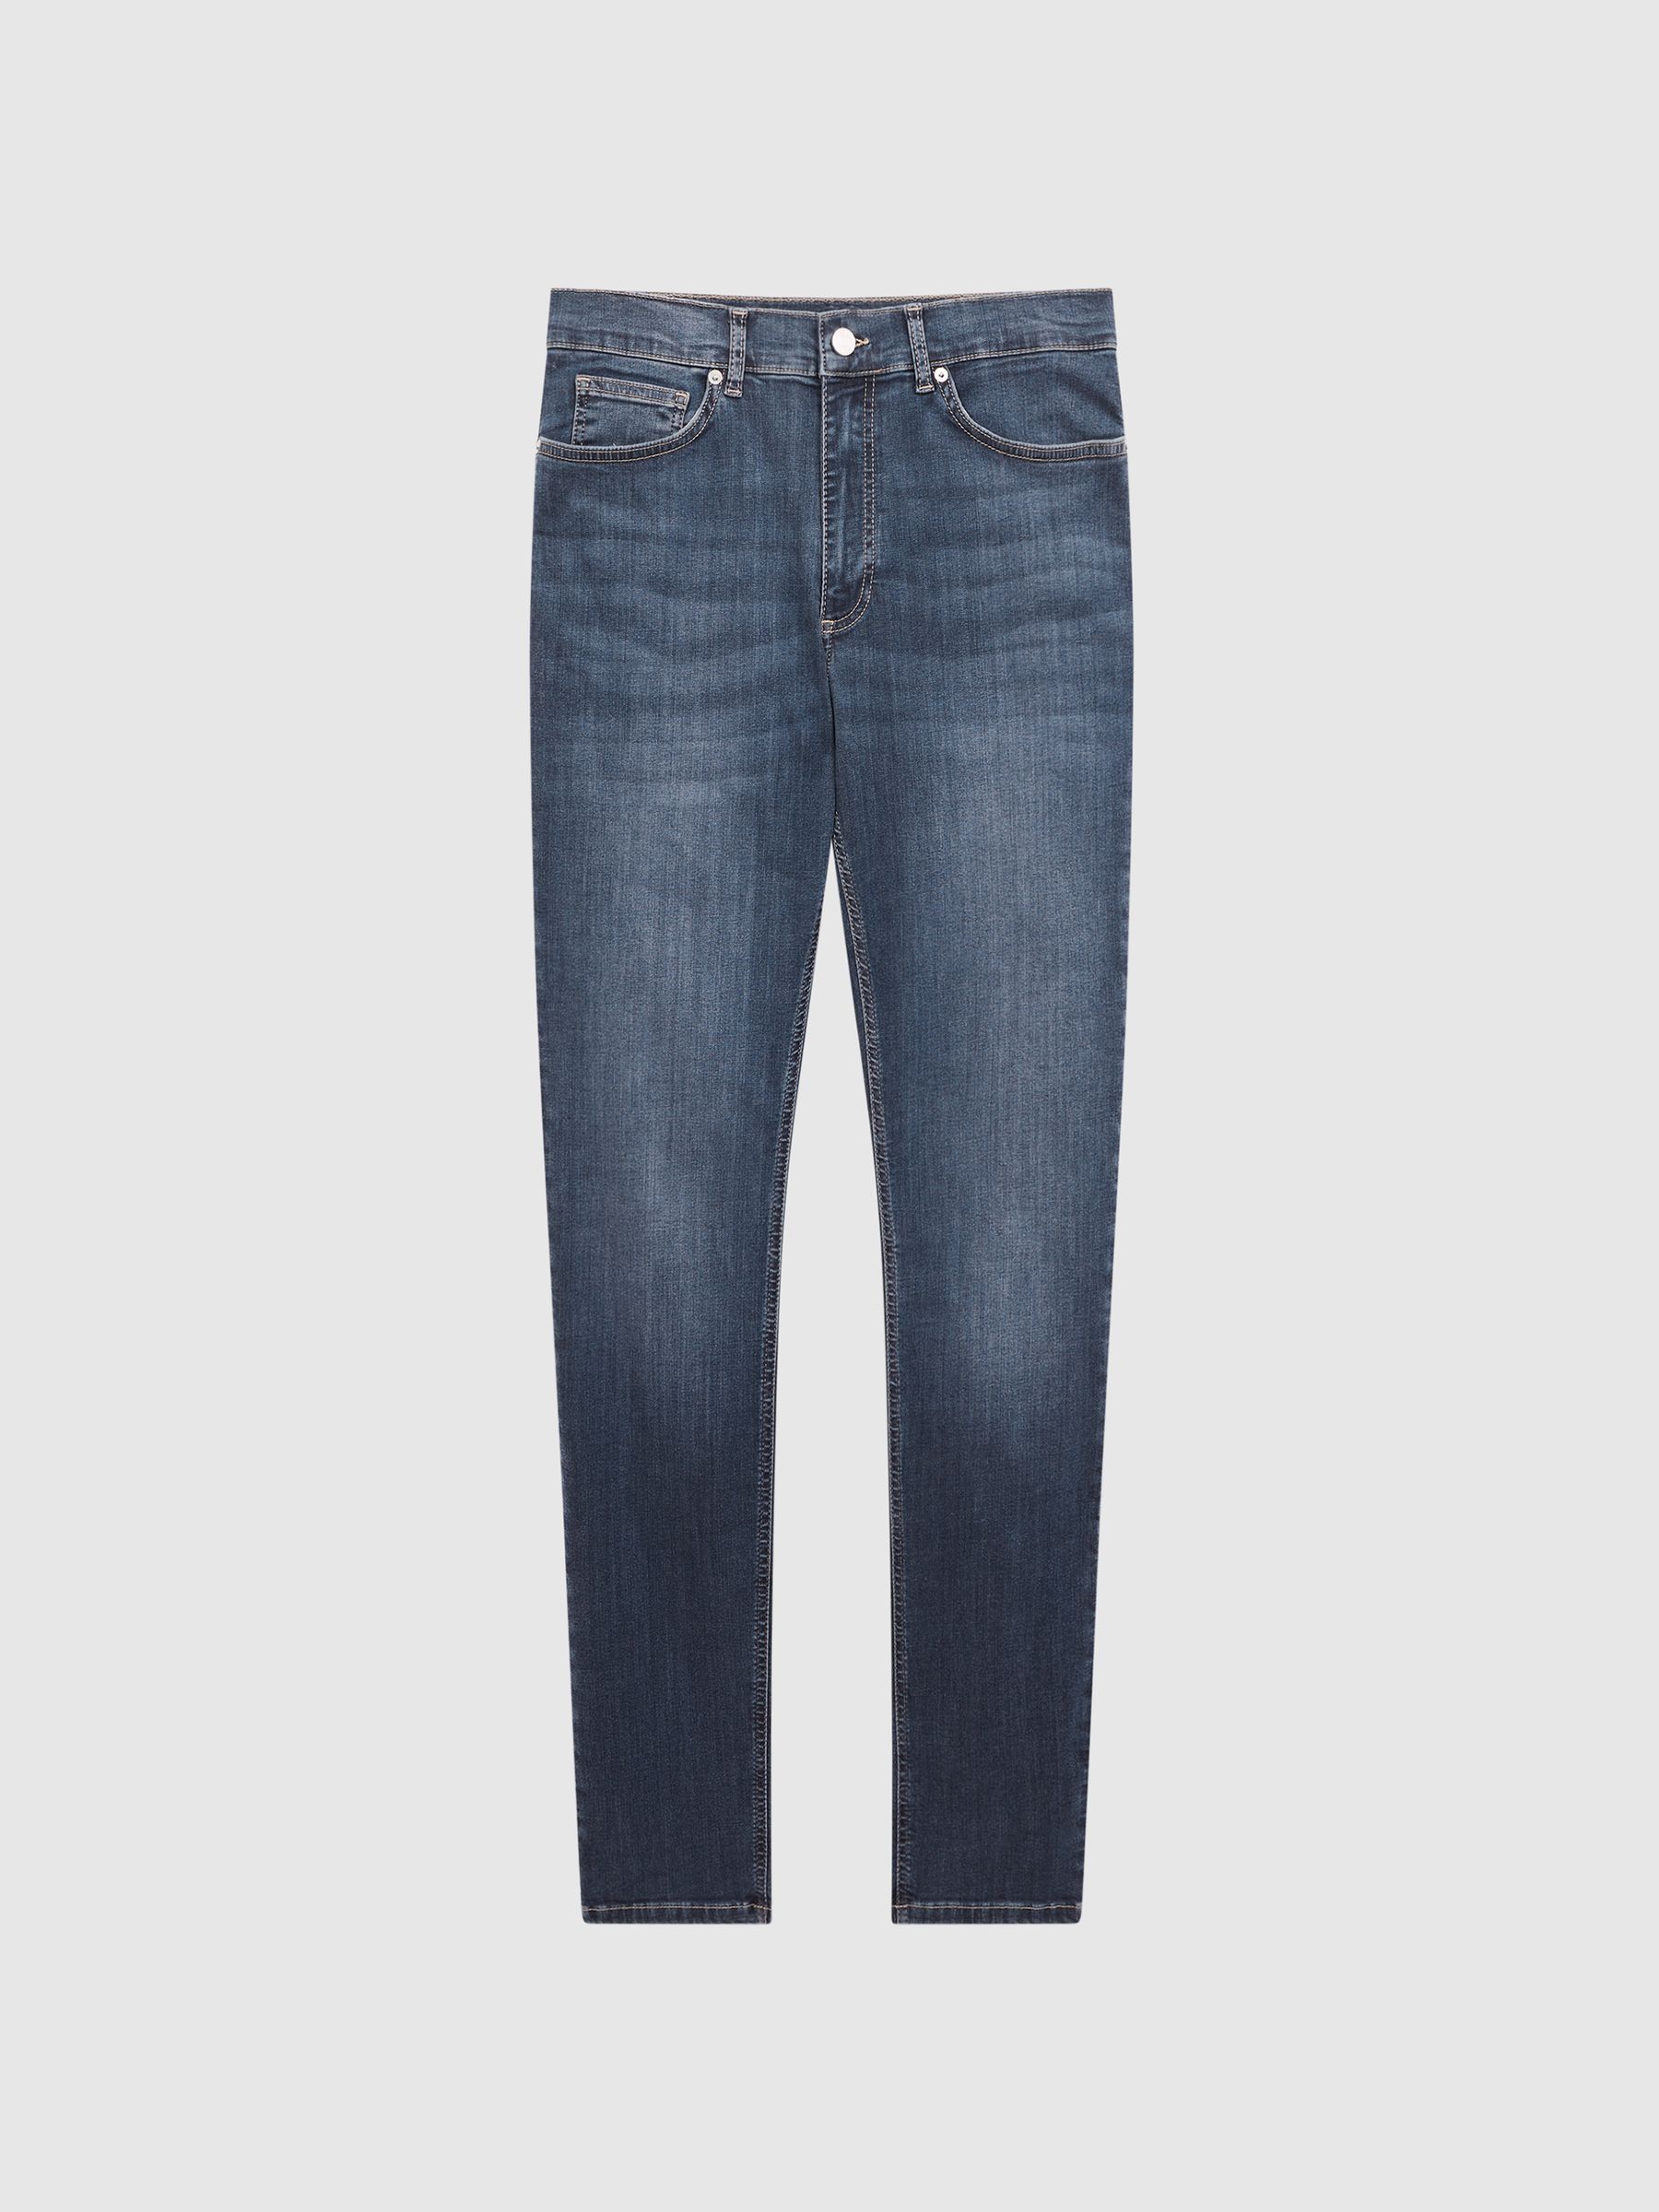 Jersey Slim Fit Washed Jeans in Washed Indigo - REISS